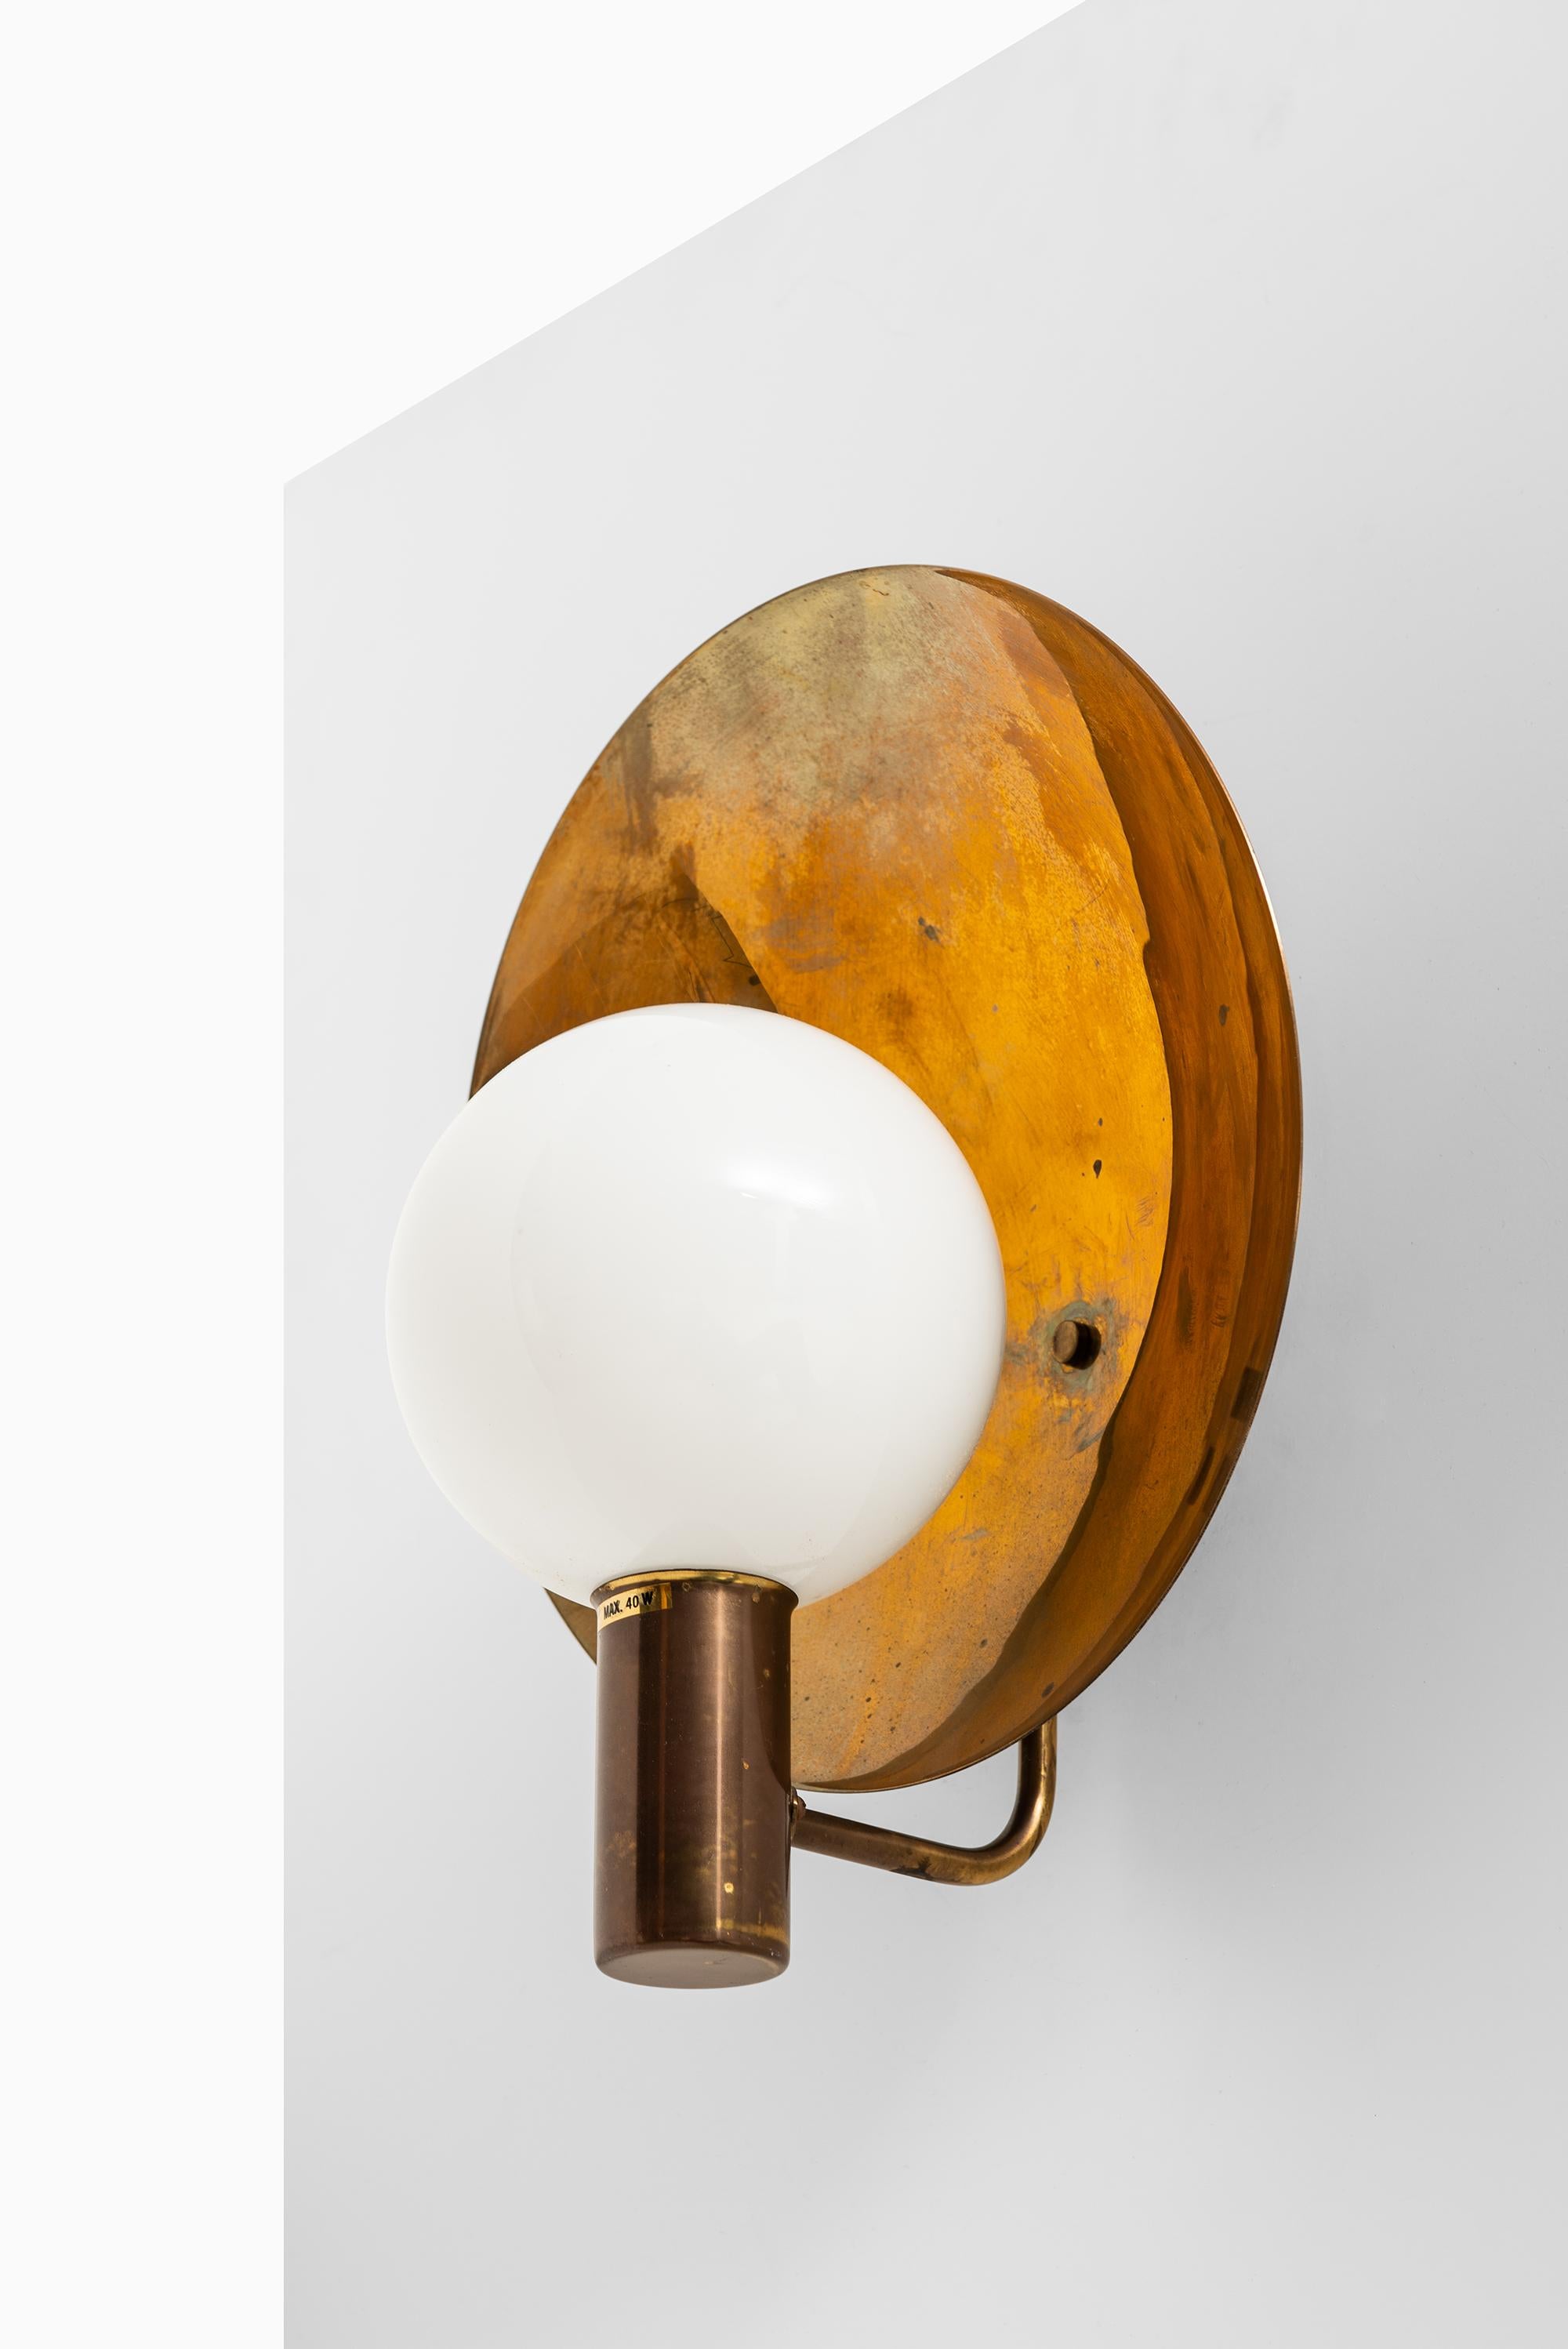 Rare wall lamps model V-180 designed by Hans-Agne Jakobsson. Produced by Hans-Agne Jakobsson in Markaryd, Sweden. 2 different type of glass is available (clear and opaline).

5 pcs available.